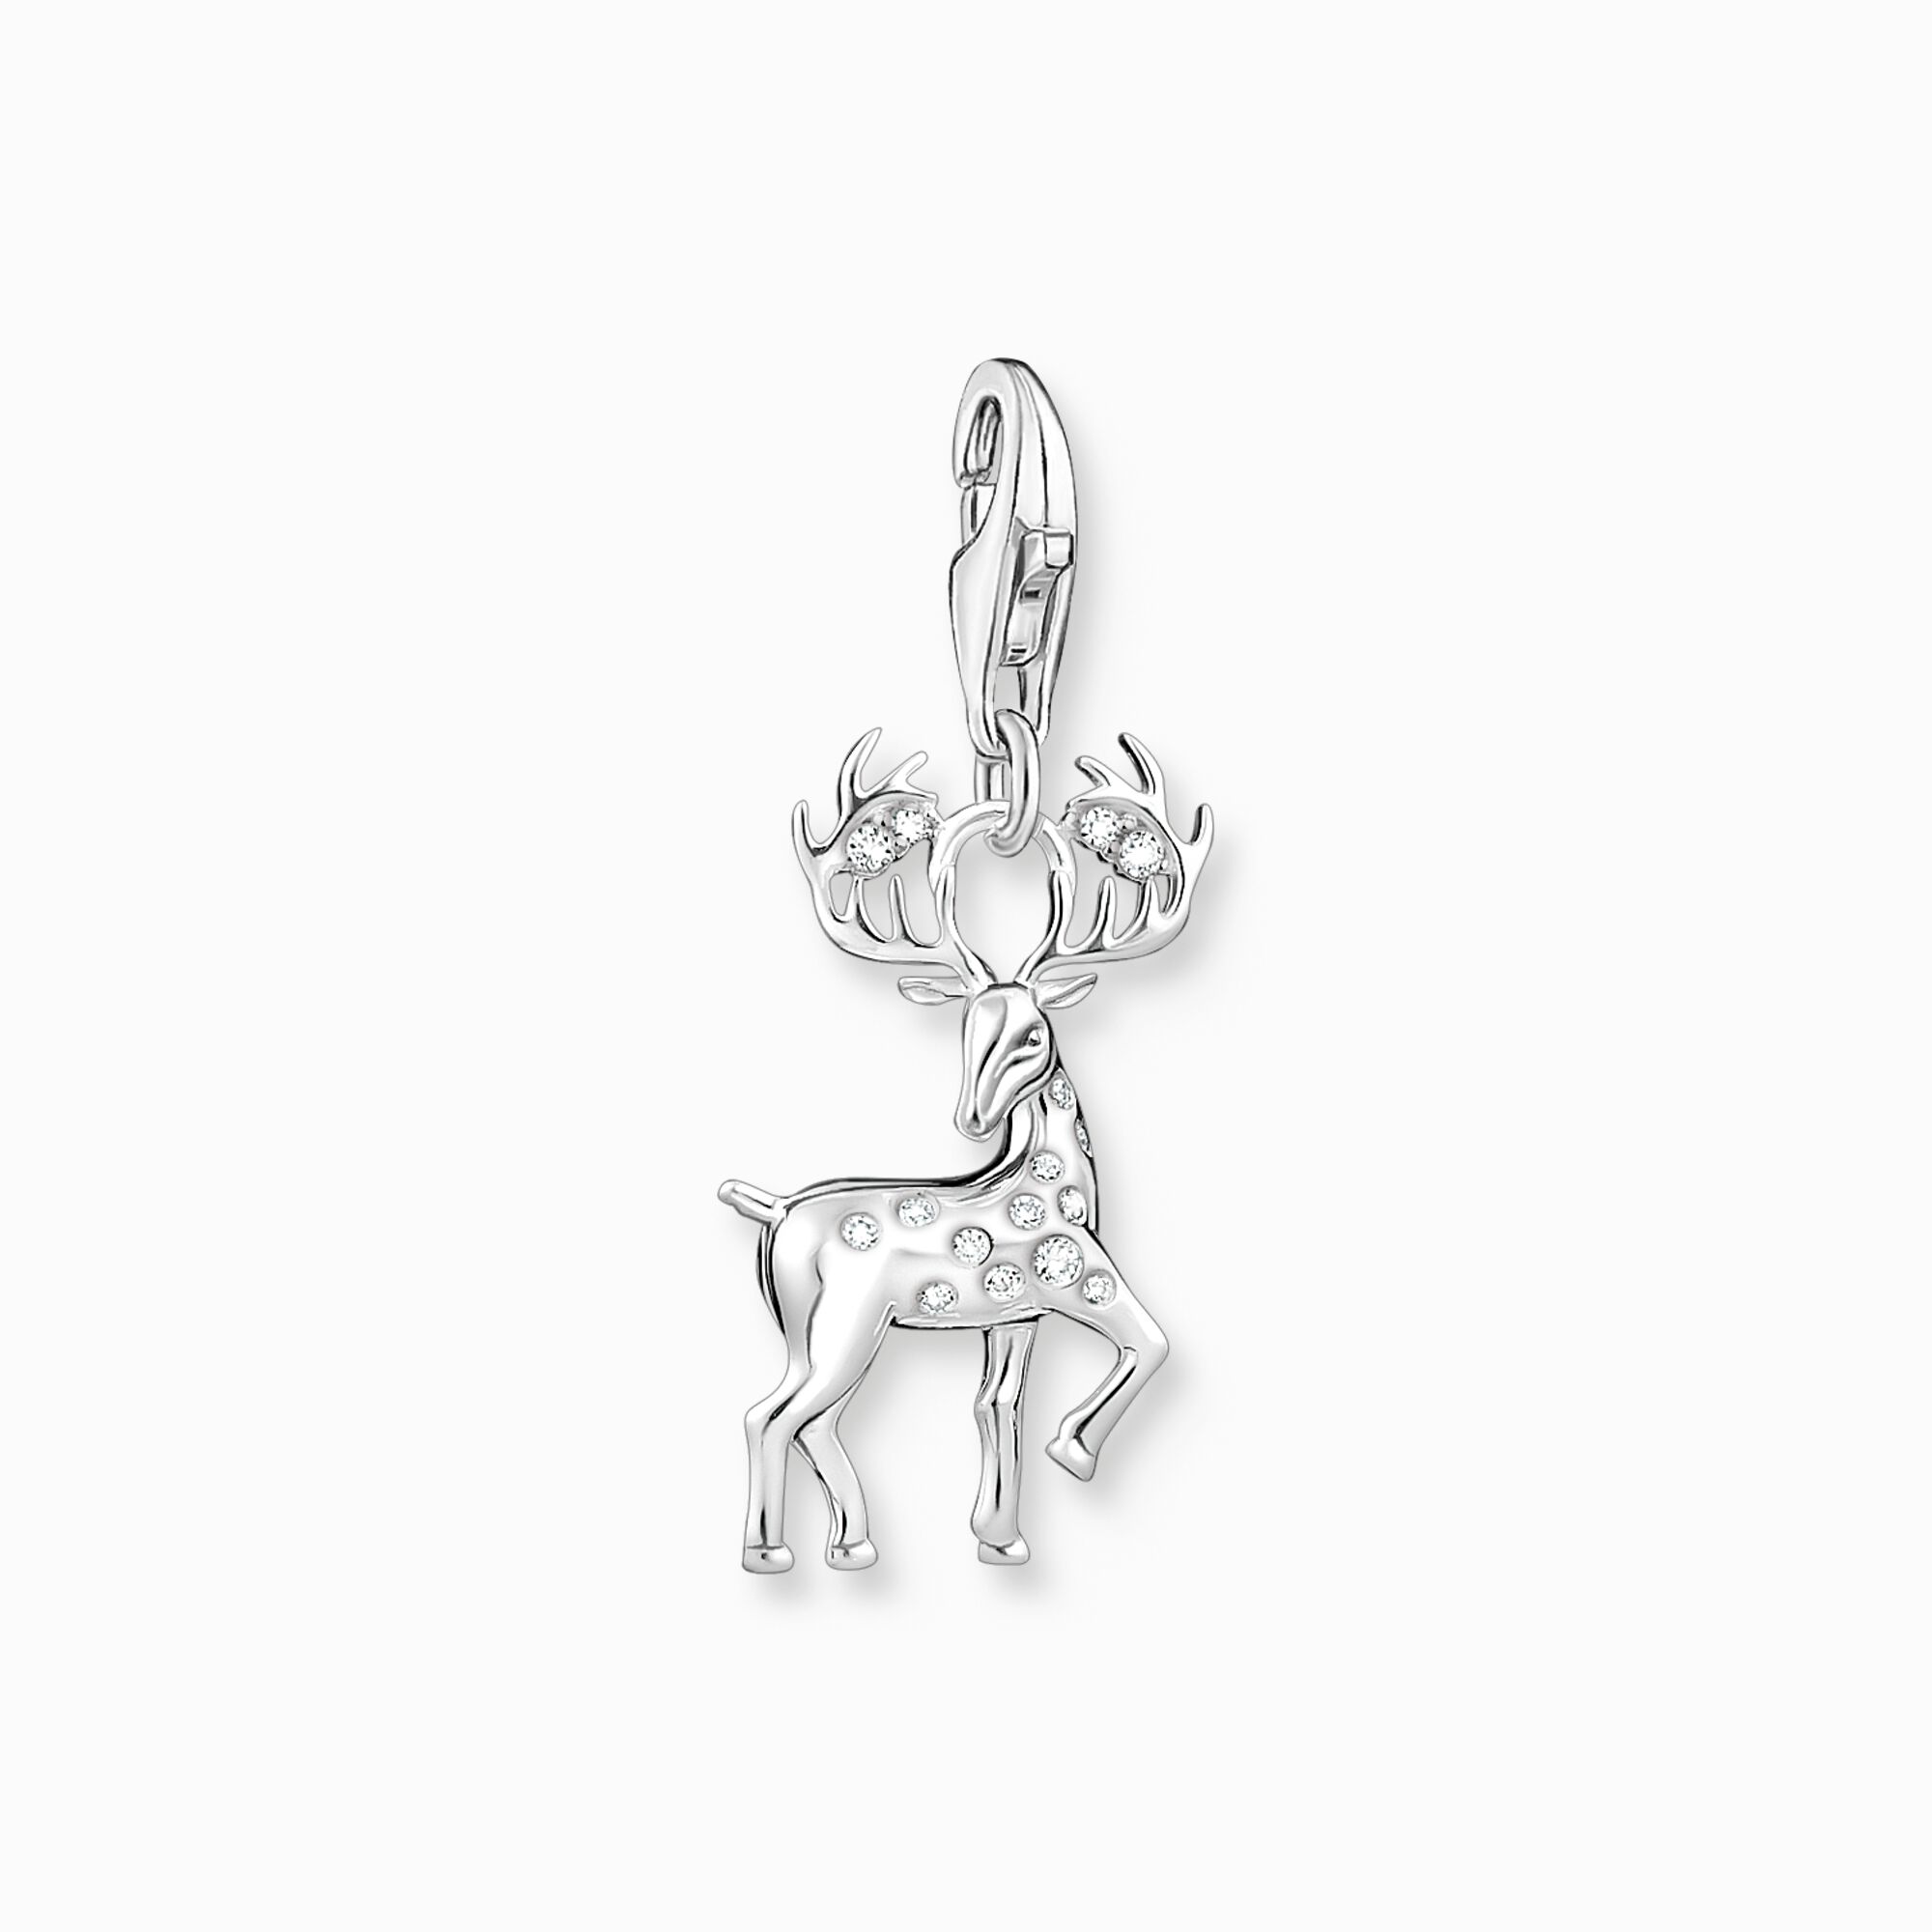 Charm pendant deer silver from the Charm Club collection in the THOMAS SABO online store